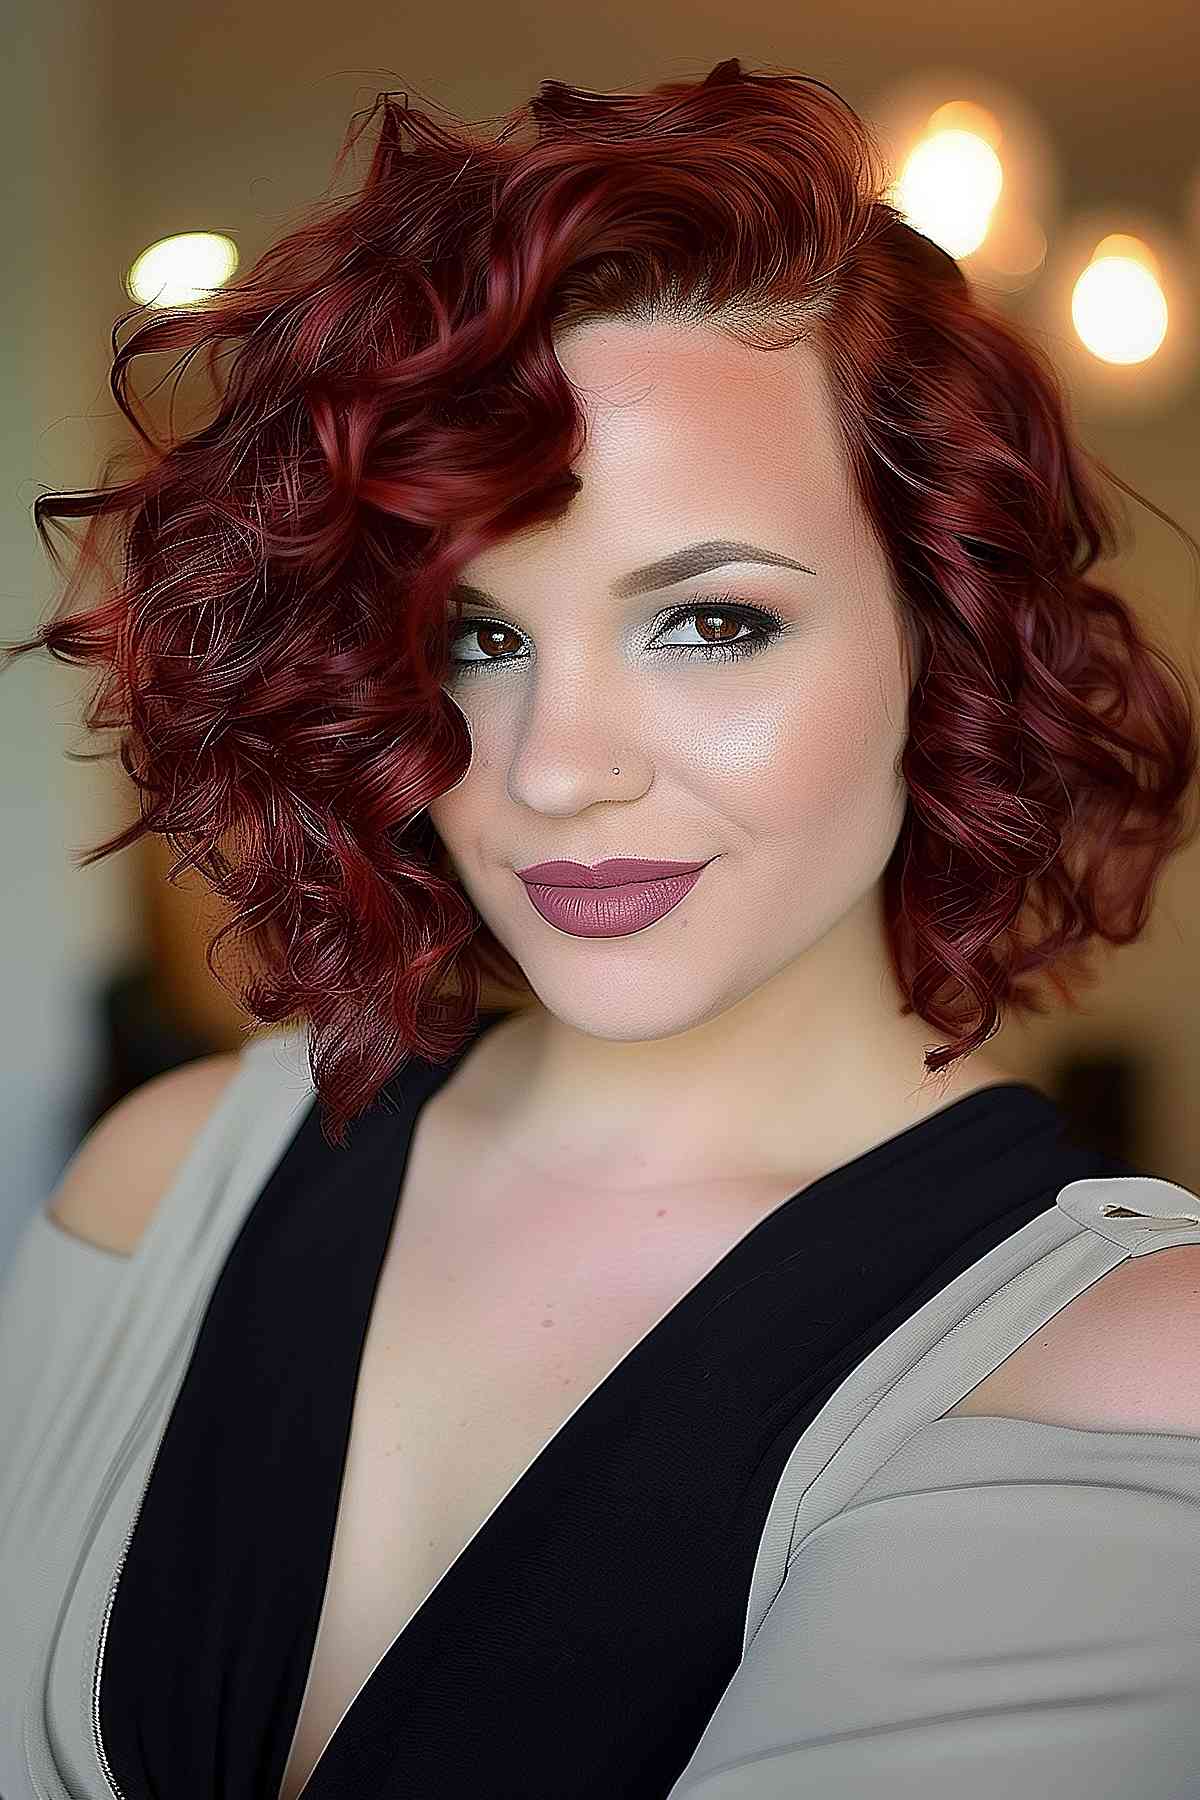 Short and curly cherry red hairstyle for a playful, voluminous look.